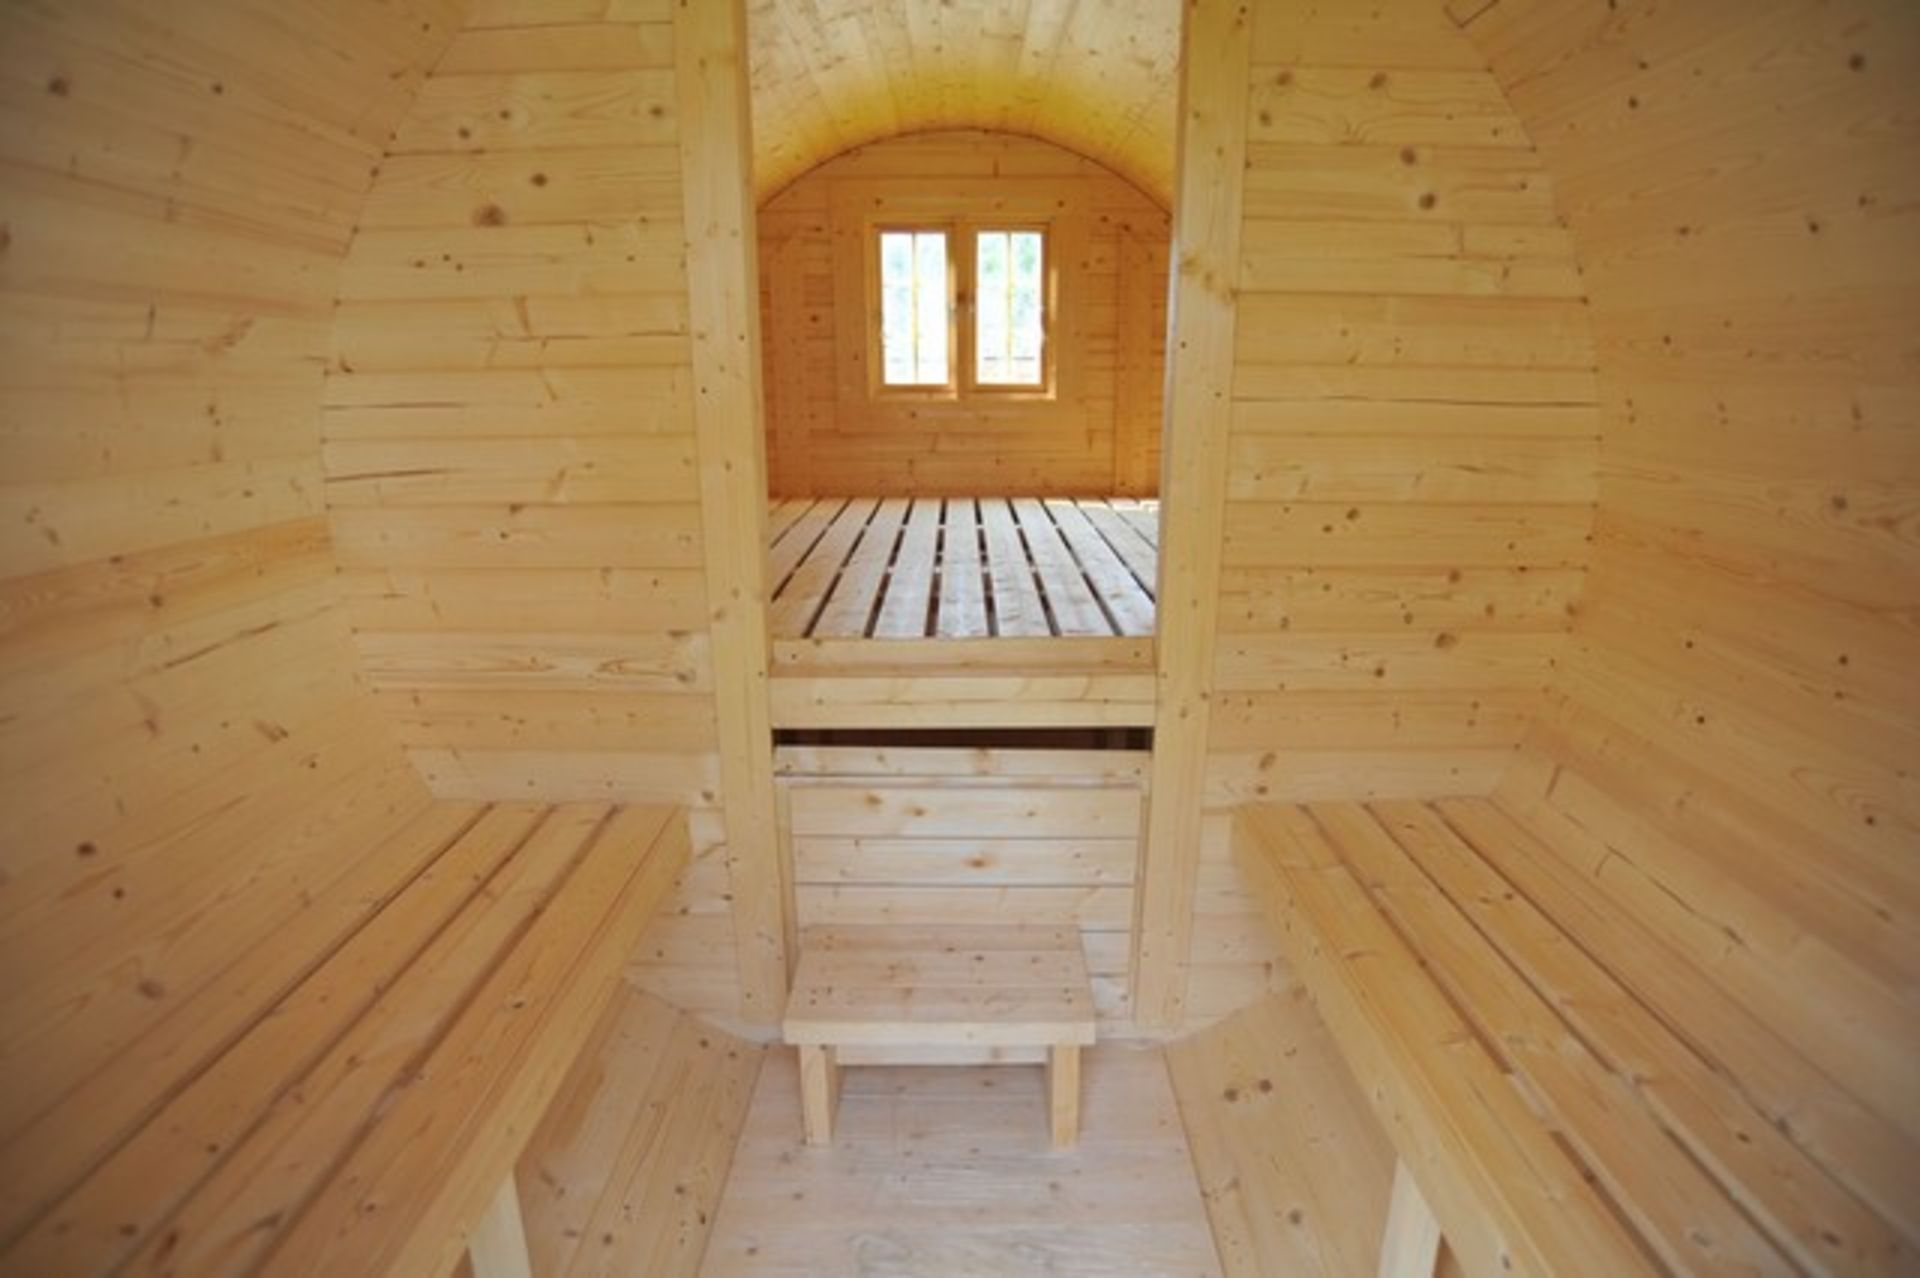 + VAT Brand New 4 x 2.4m Barrel For Sleeping - Sleeping Room 2 x 2m - Small Benches at Entrance - - Image 3 of 3